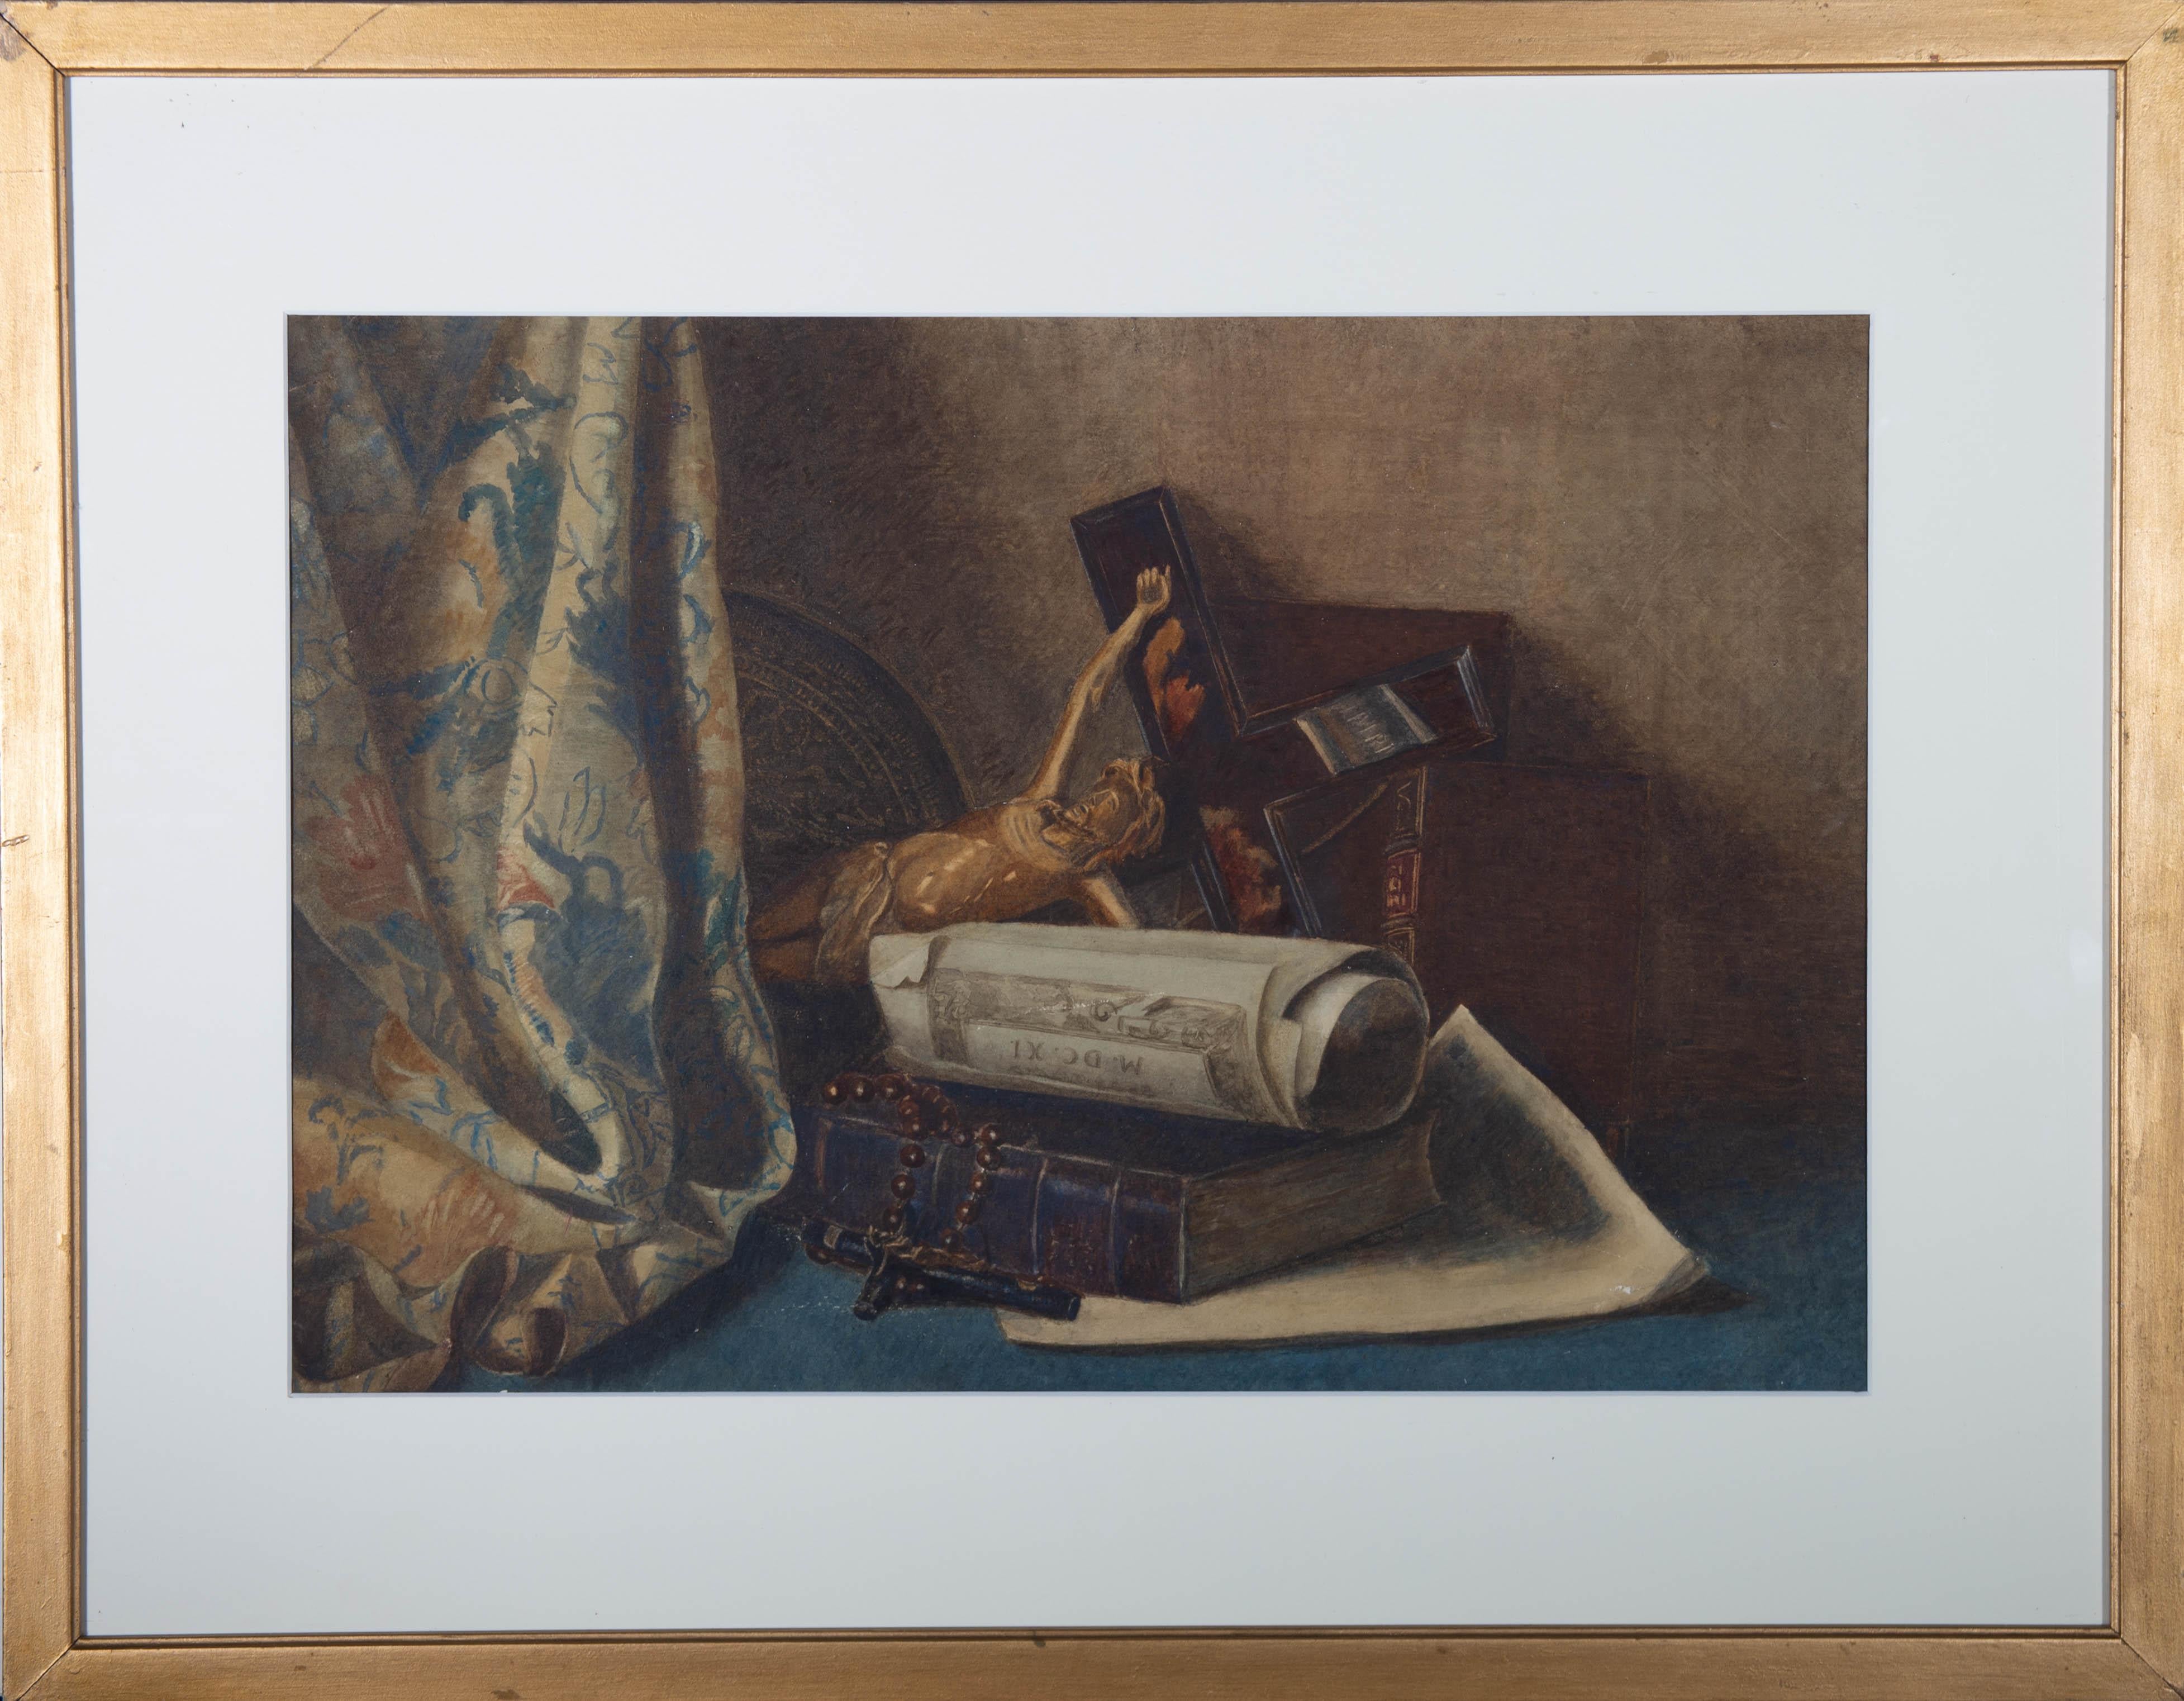 Unknown Still-Life - Early 20th Century Watercolour - Still Life with Religious Artefacts